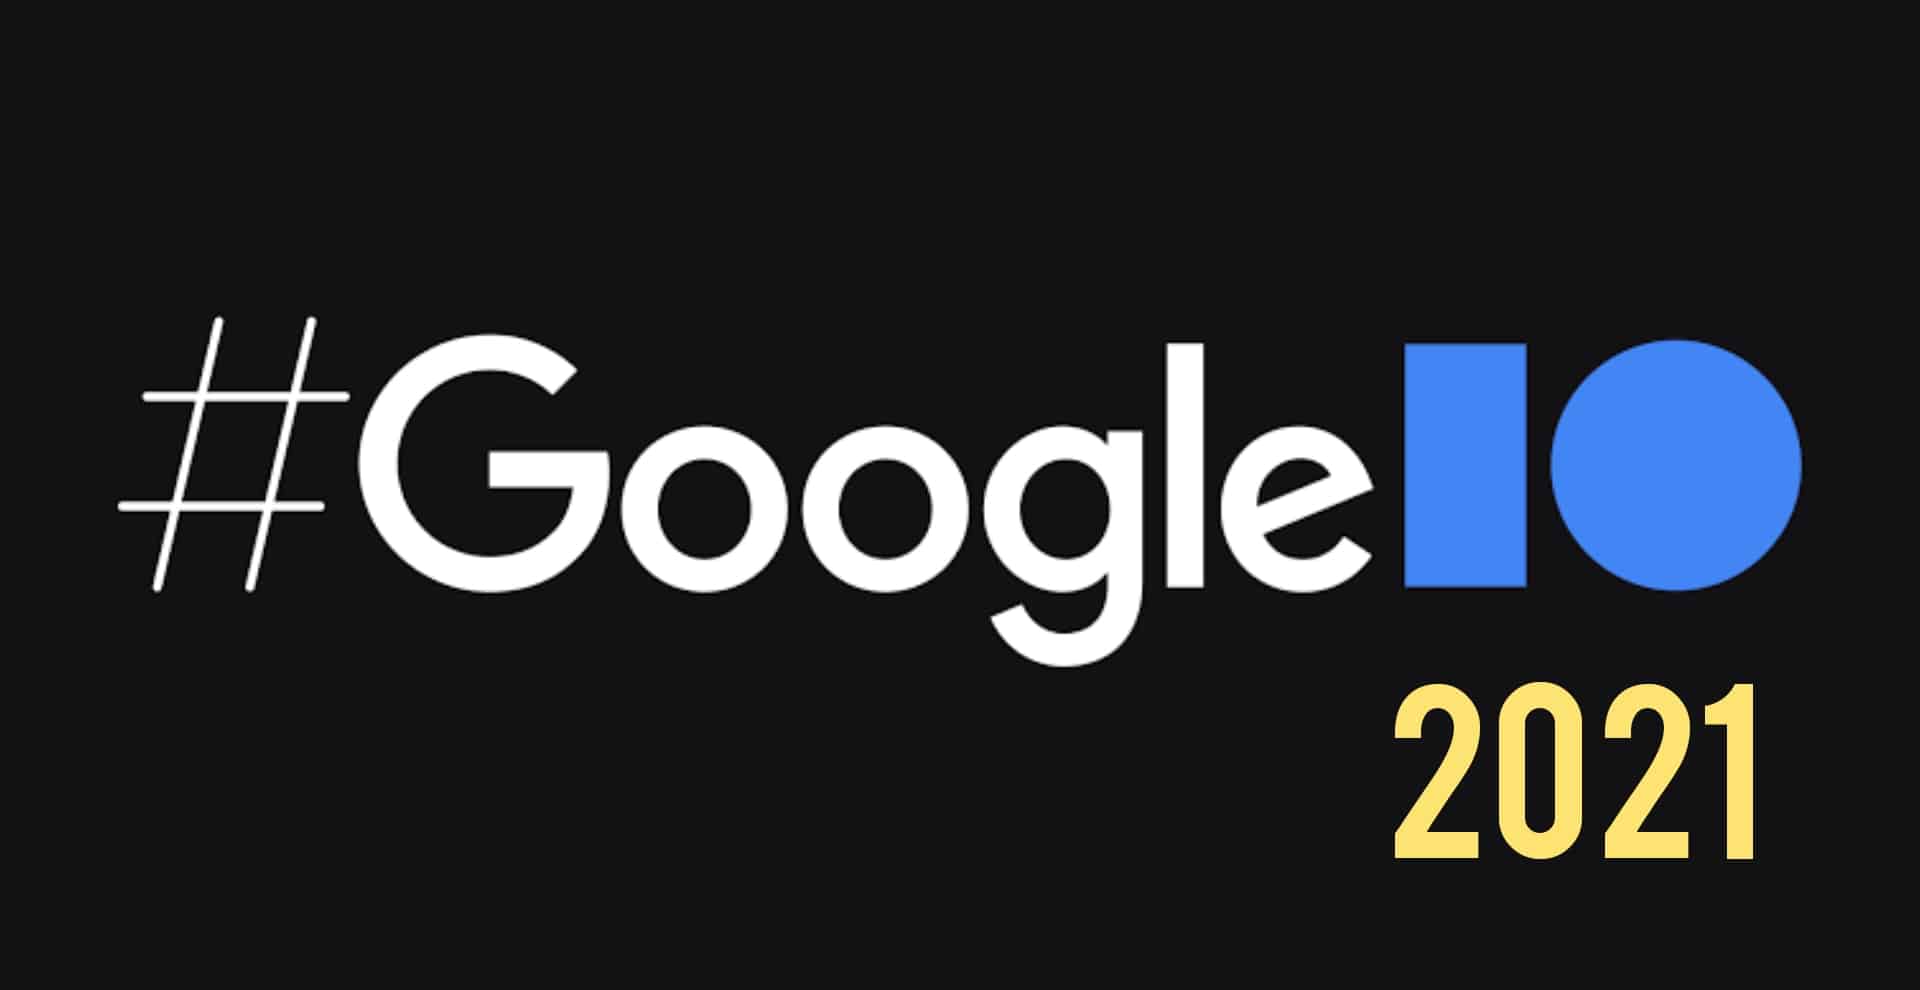 Google I/O 2021: Here's What to Expect from Google's Developer Conference